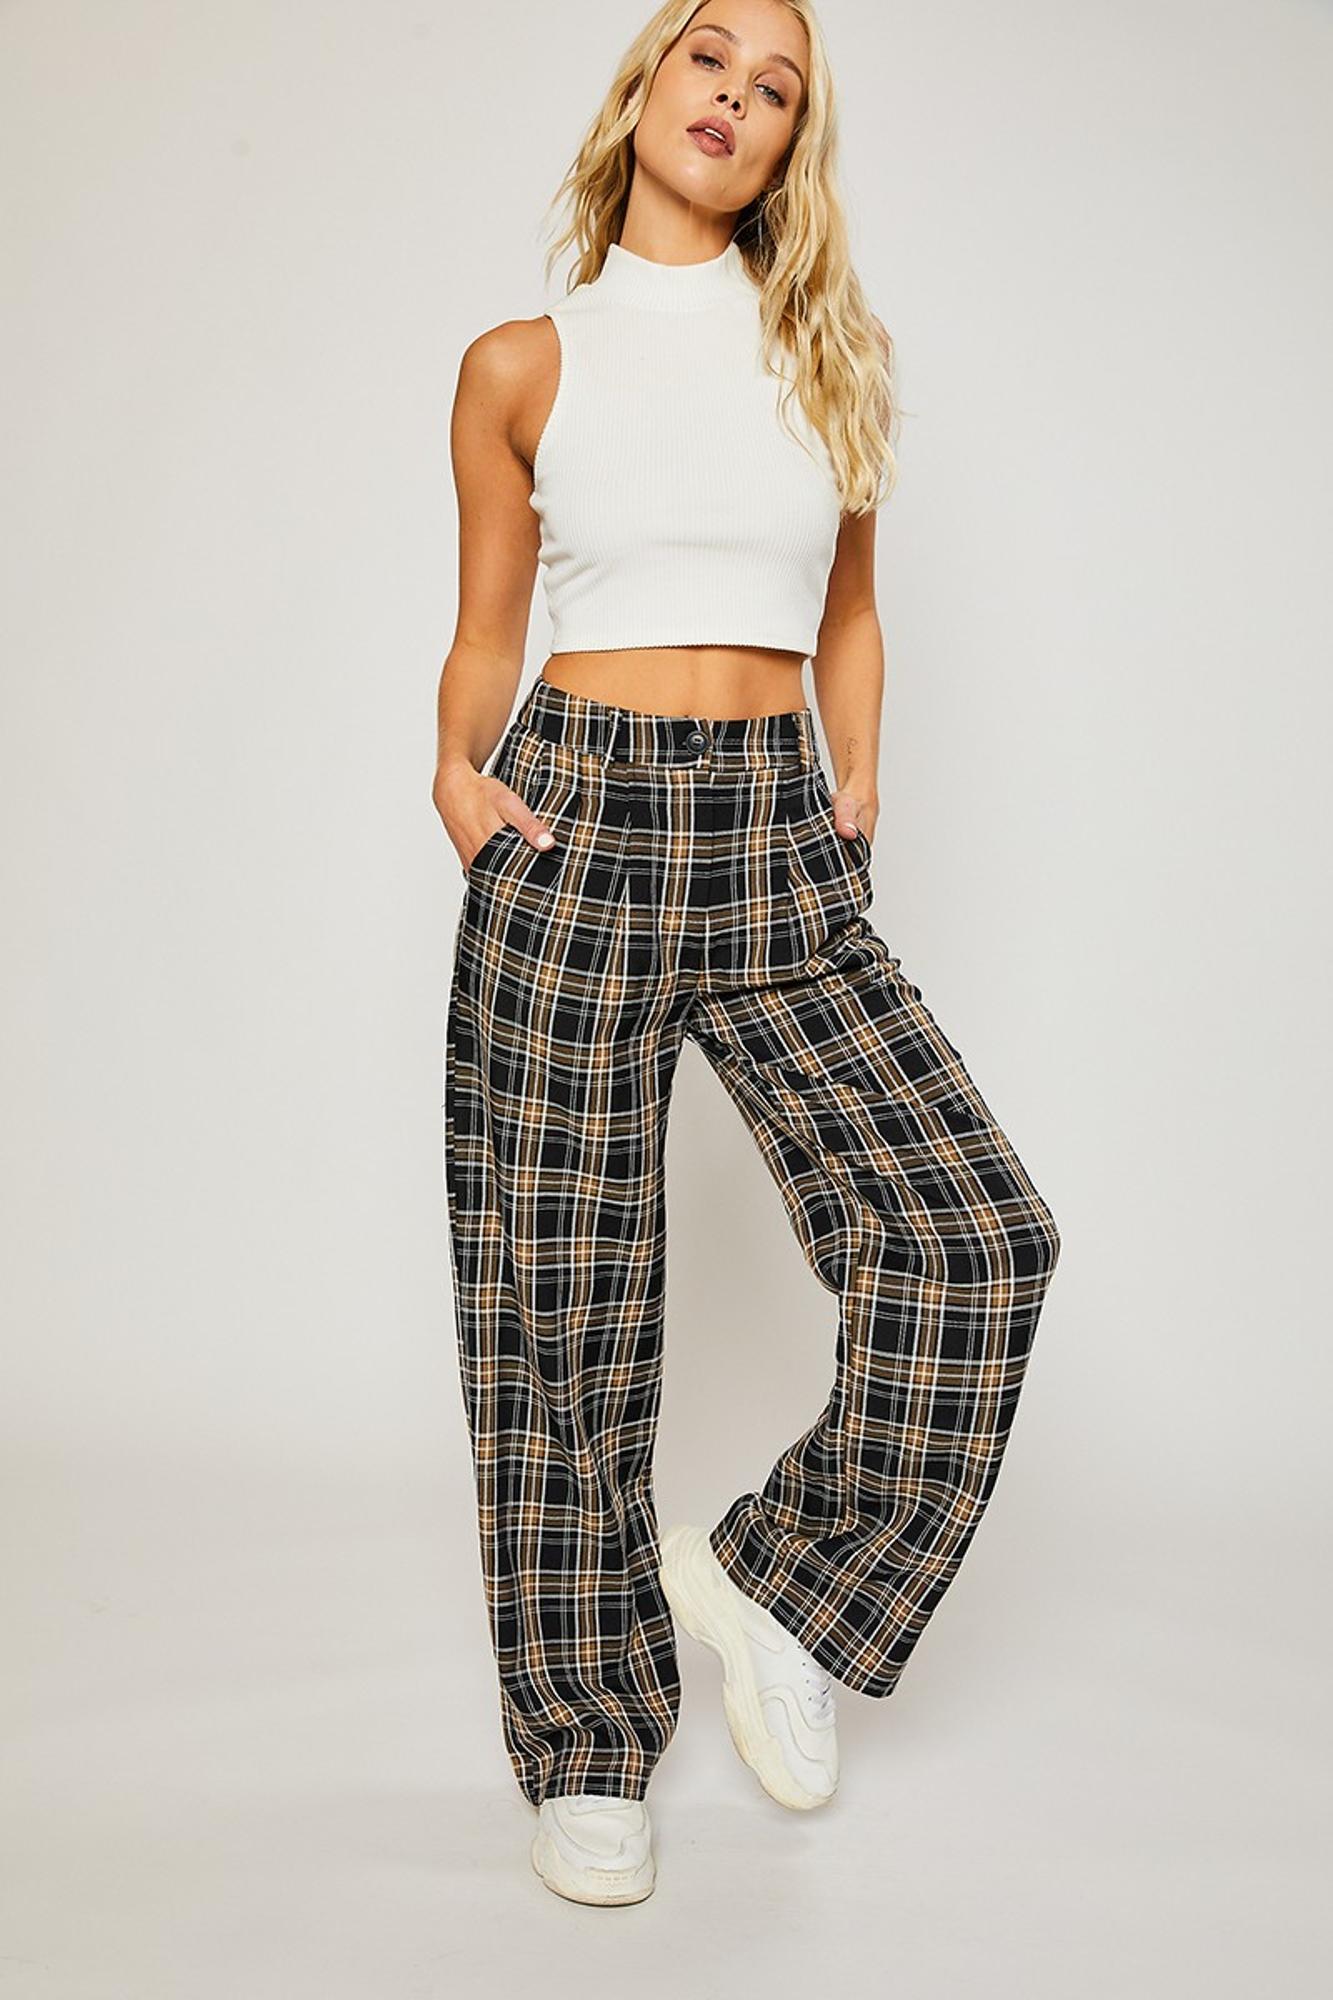 Living For The Weekend Plaid Pants